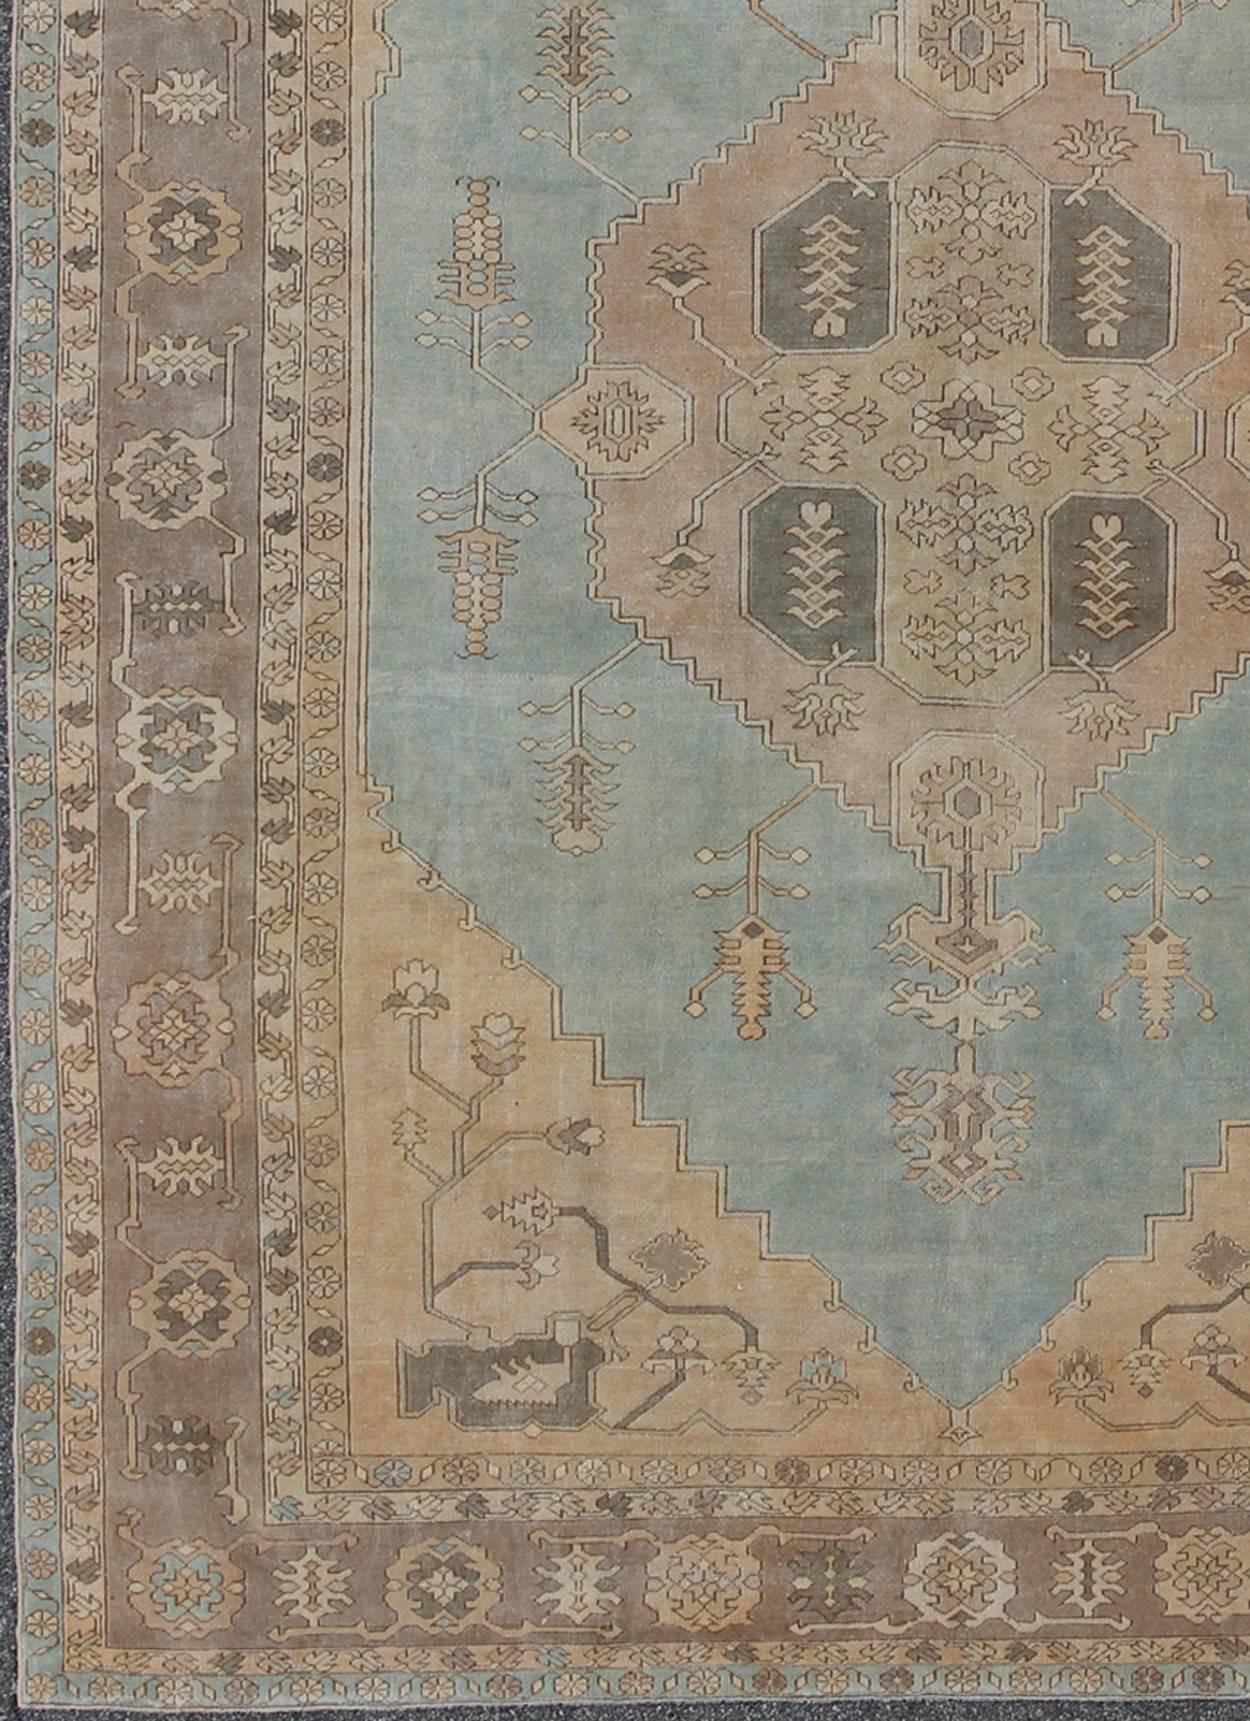 Vintage Turkish Oushak rug with vining florals in light blue, light brown and tan rug tu-mtu-3749, country of origin / type: Turkey / Oushak, circa 1940

This beautiful vintage rug from mid-20th century Turkey features an intricate design, which